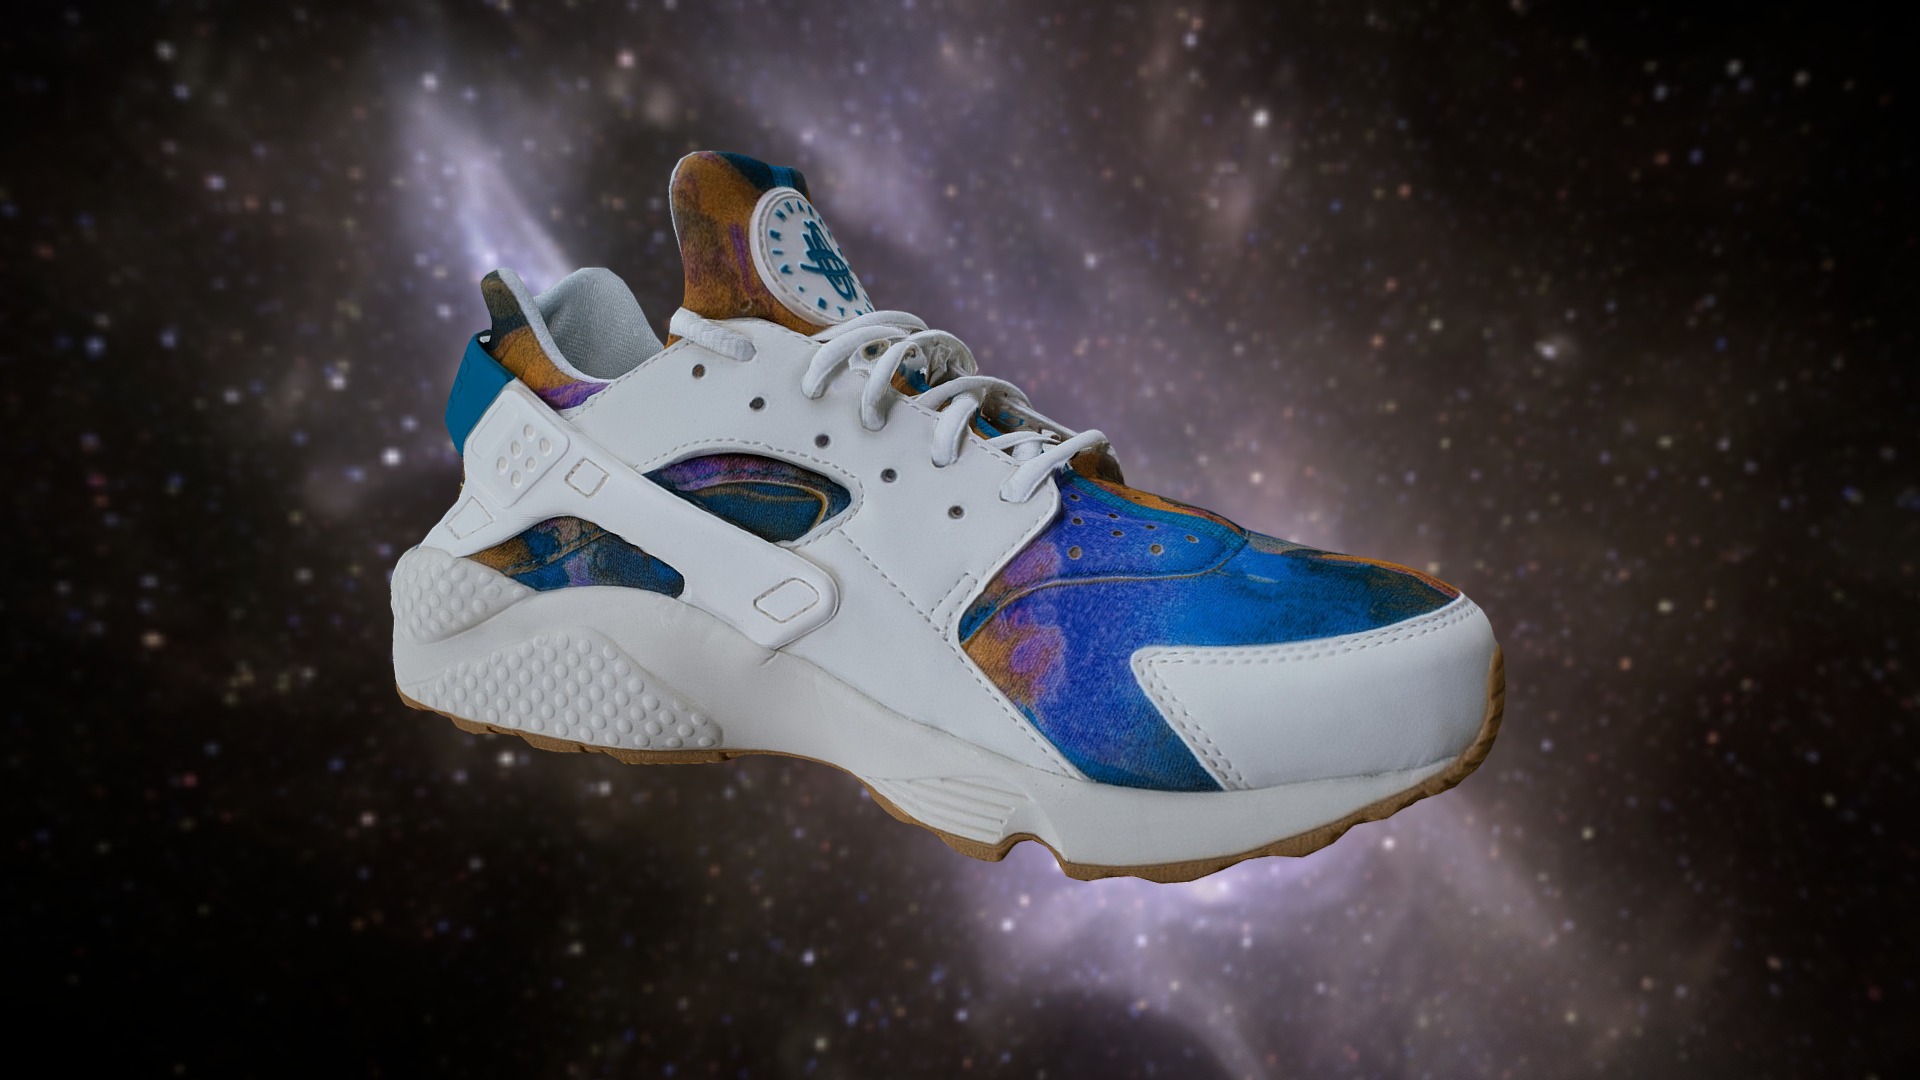 3D model Nike Air Max Tie Dye Sneakers Shoes low poly - This is a 3D model of the Nike Air Max Tie Dye Sneakers Shoes low poly. The 3D model is about a white and blue shoe.